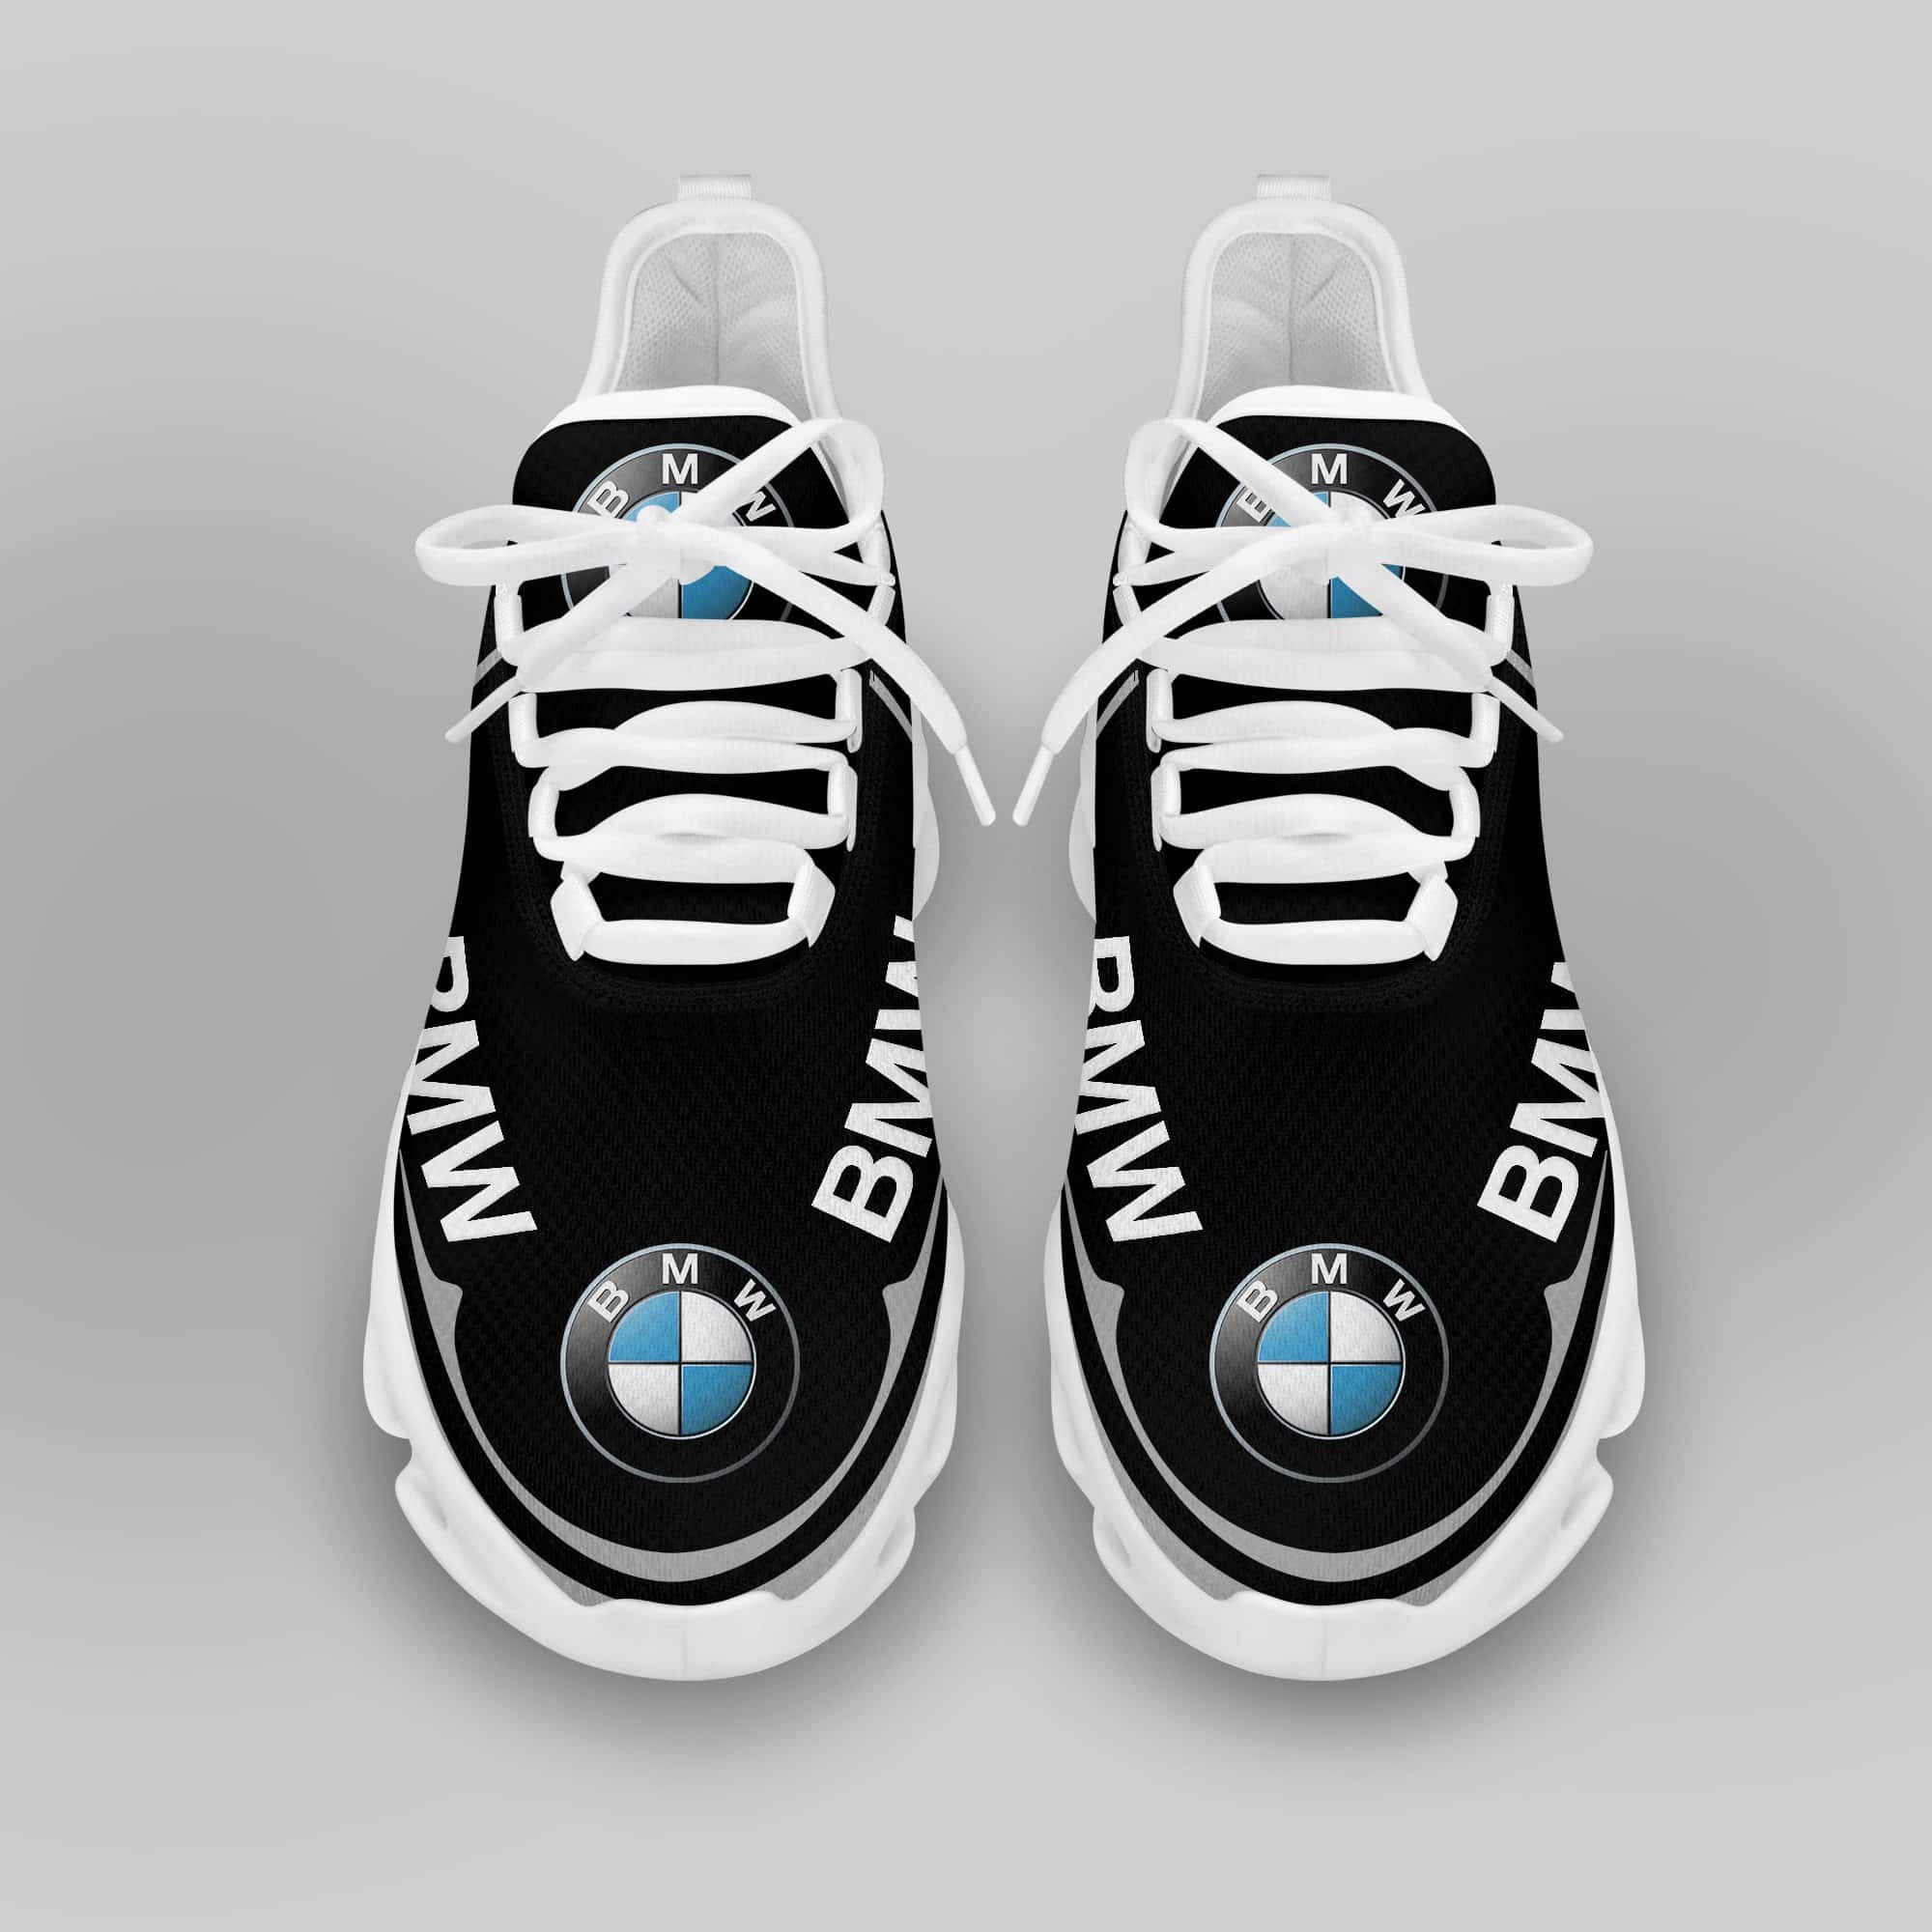 Bmw Running Shoes Max Soul Shoes Sneakers Ver 31 3